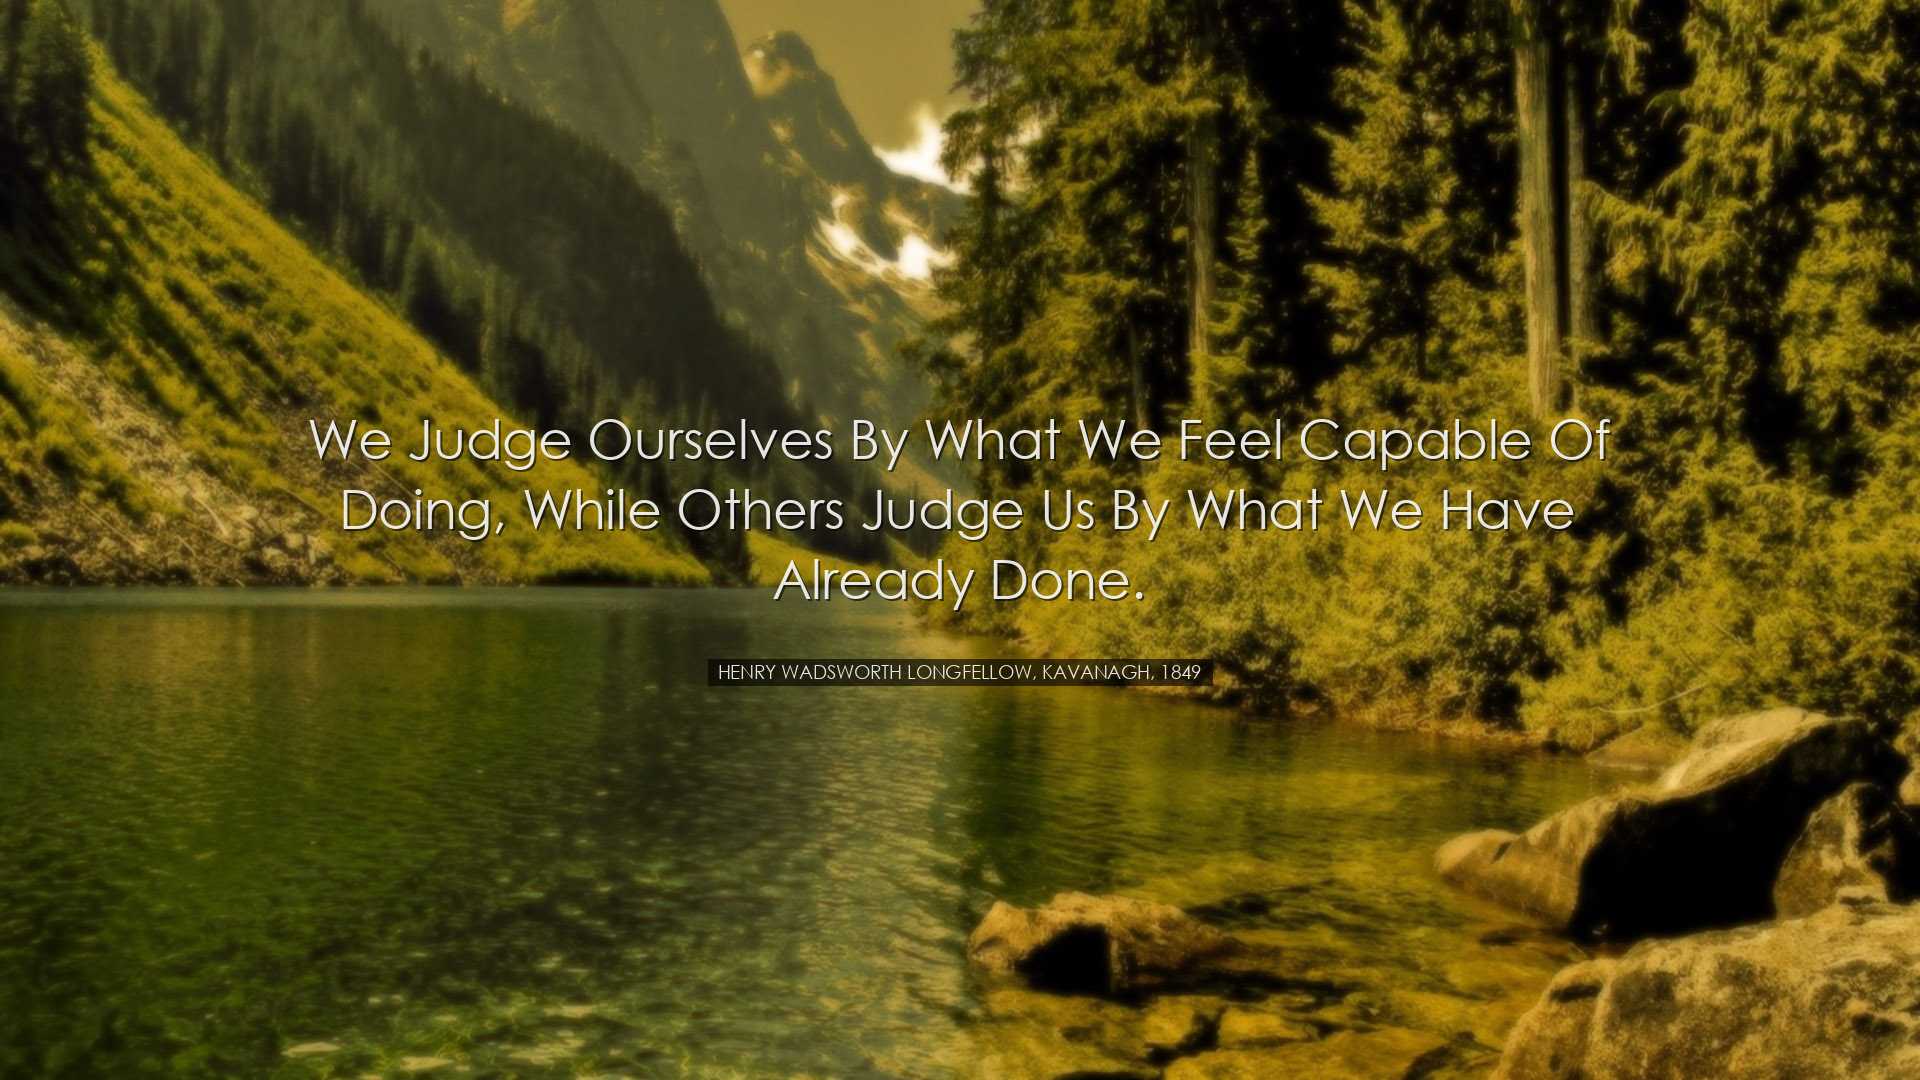 We judge ourselves by what we feel capable of doing, while others